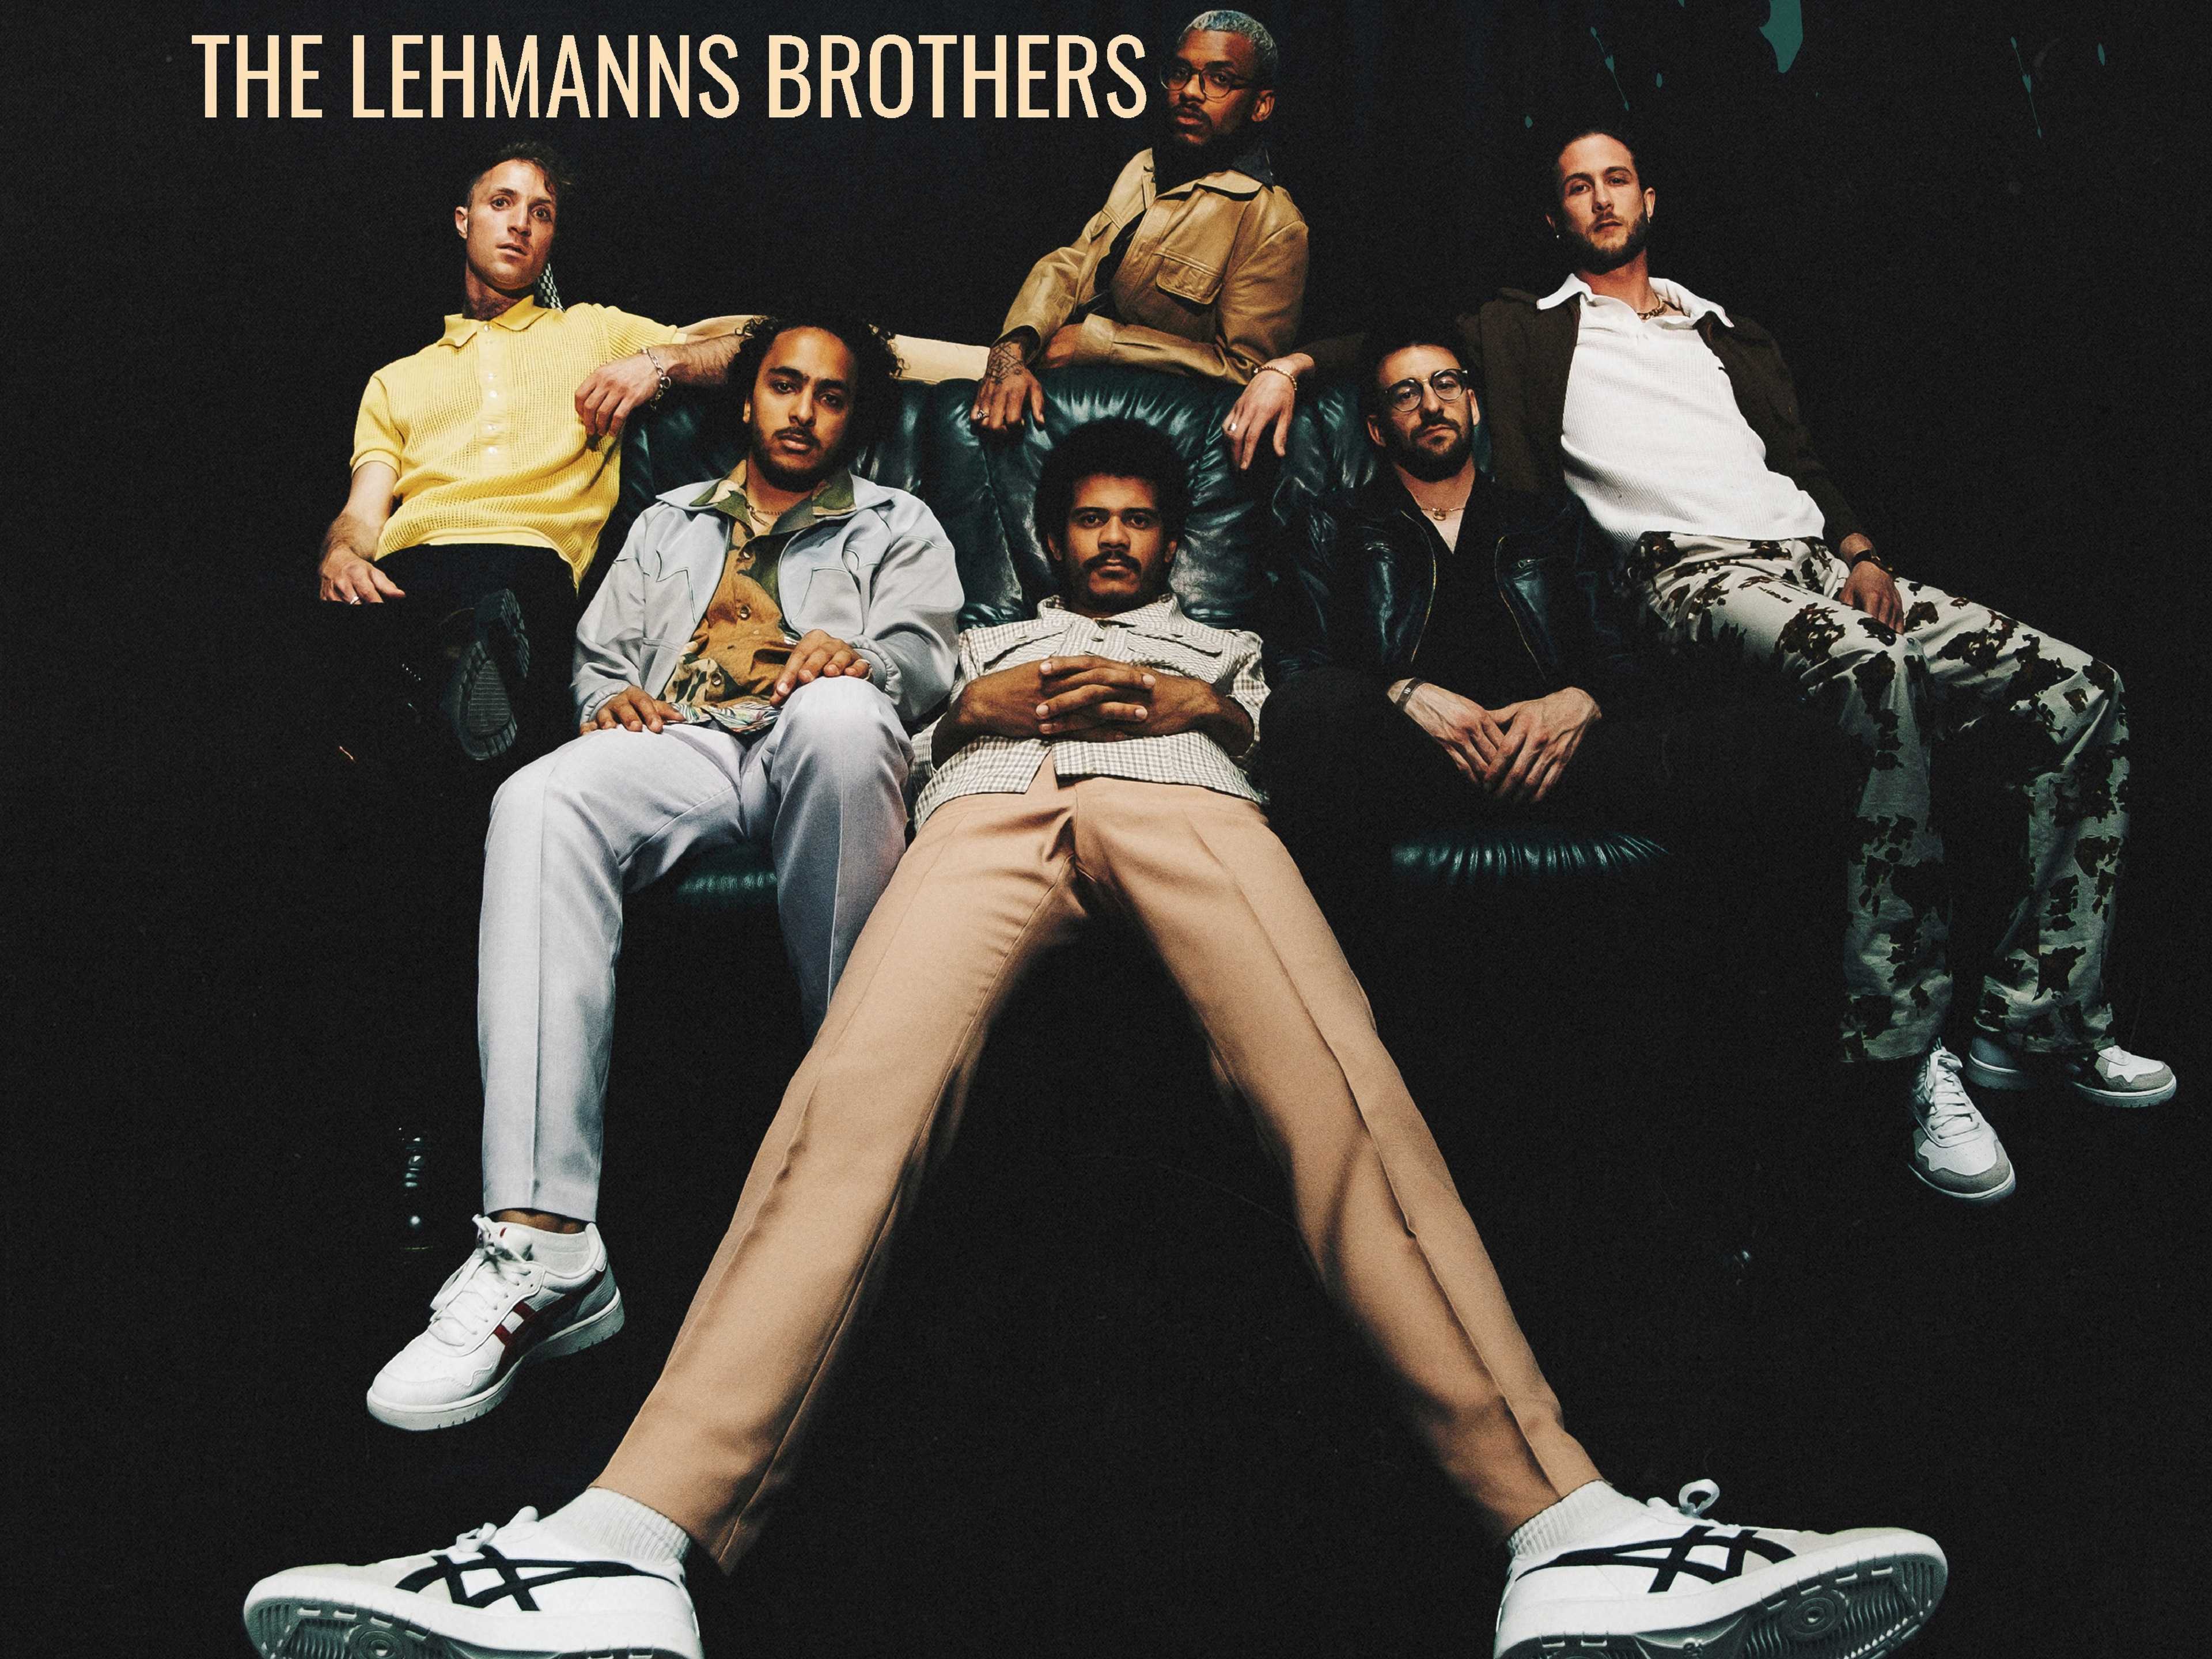 The Lehmanns Brothers